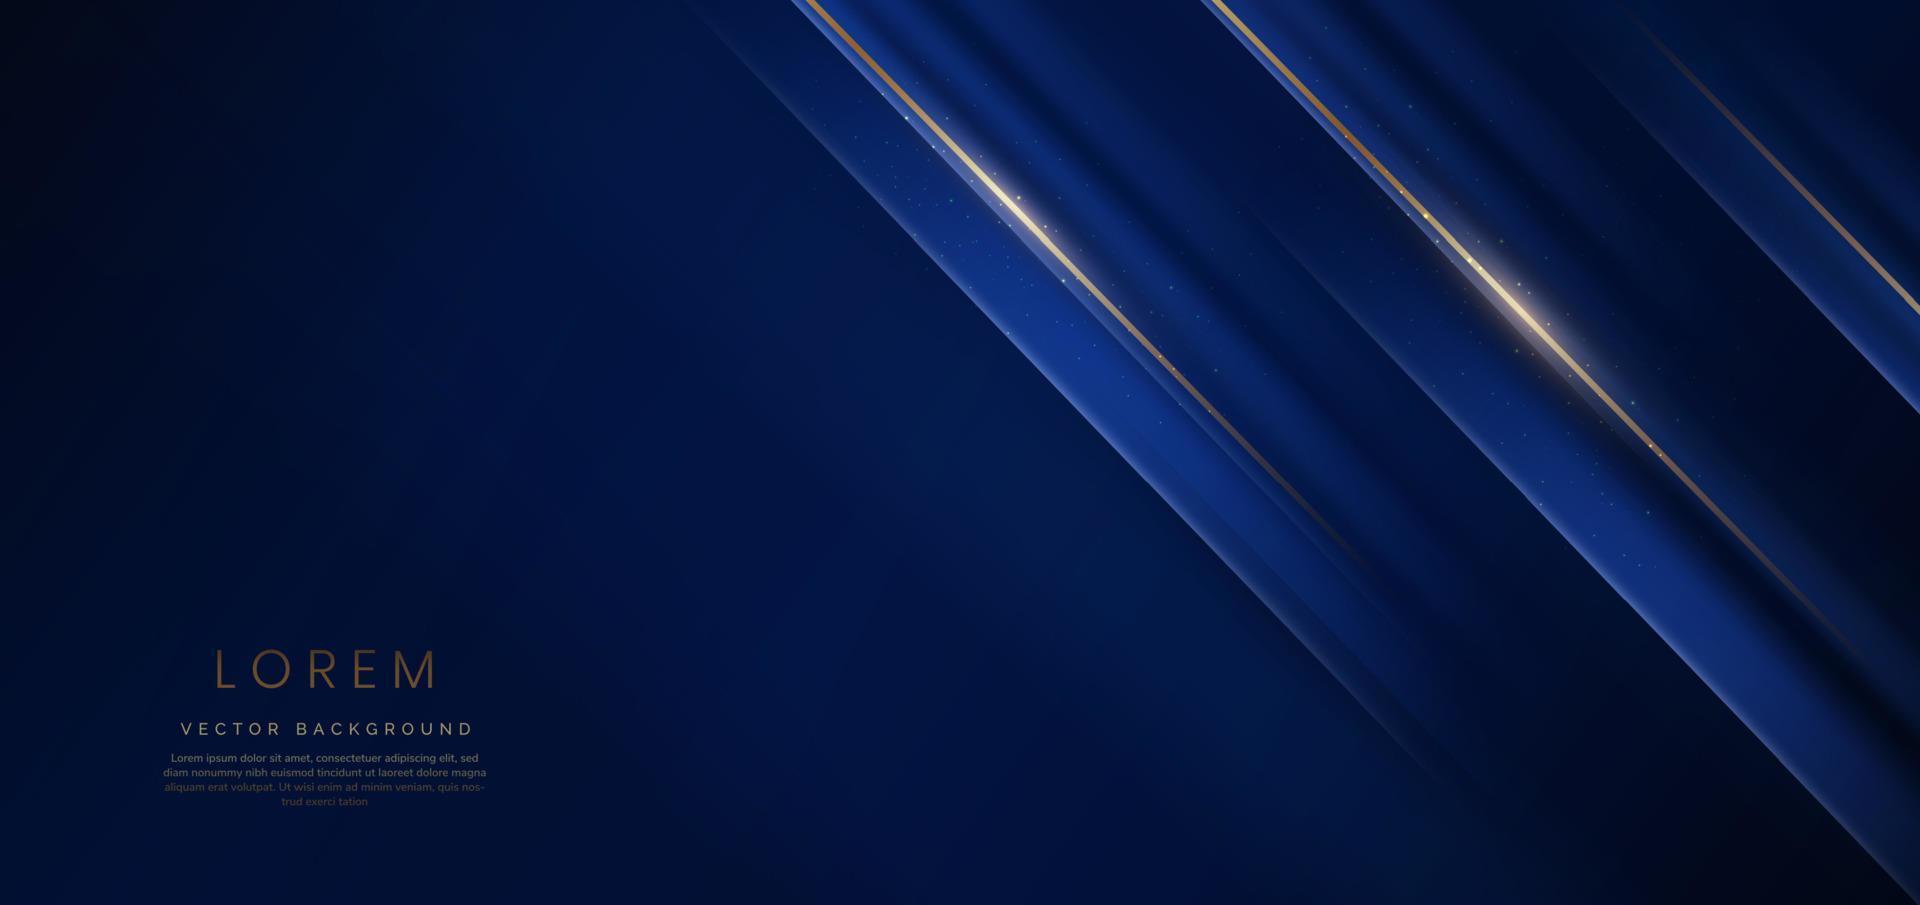 Abstract elegant dark blue background with golden line and lighting effect sparkle. Luxury template design. vector